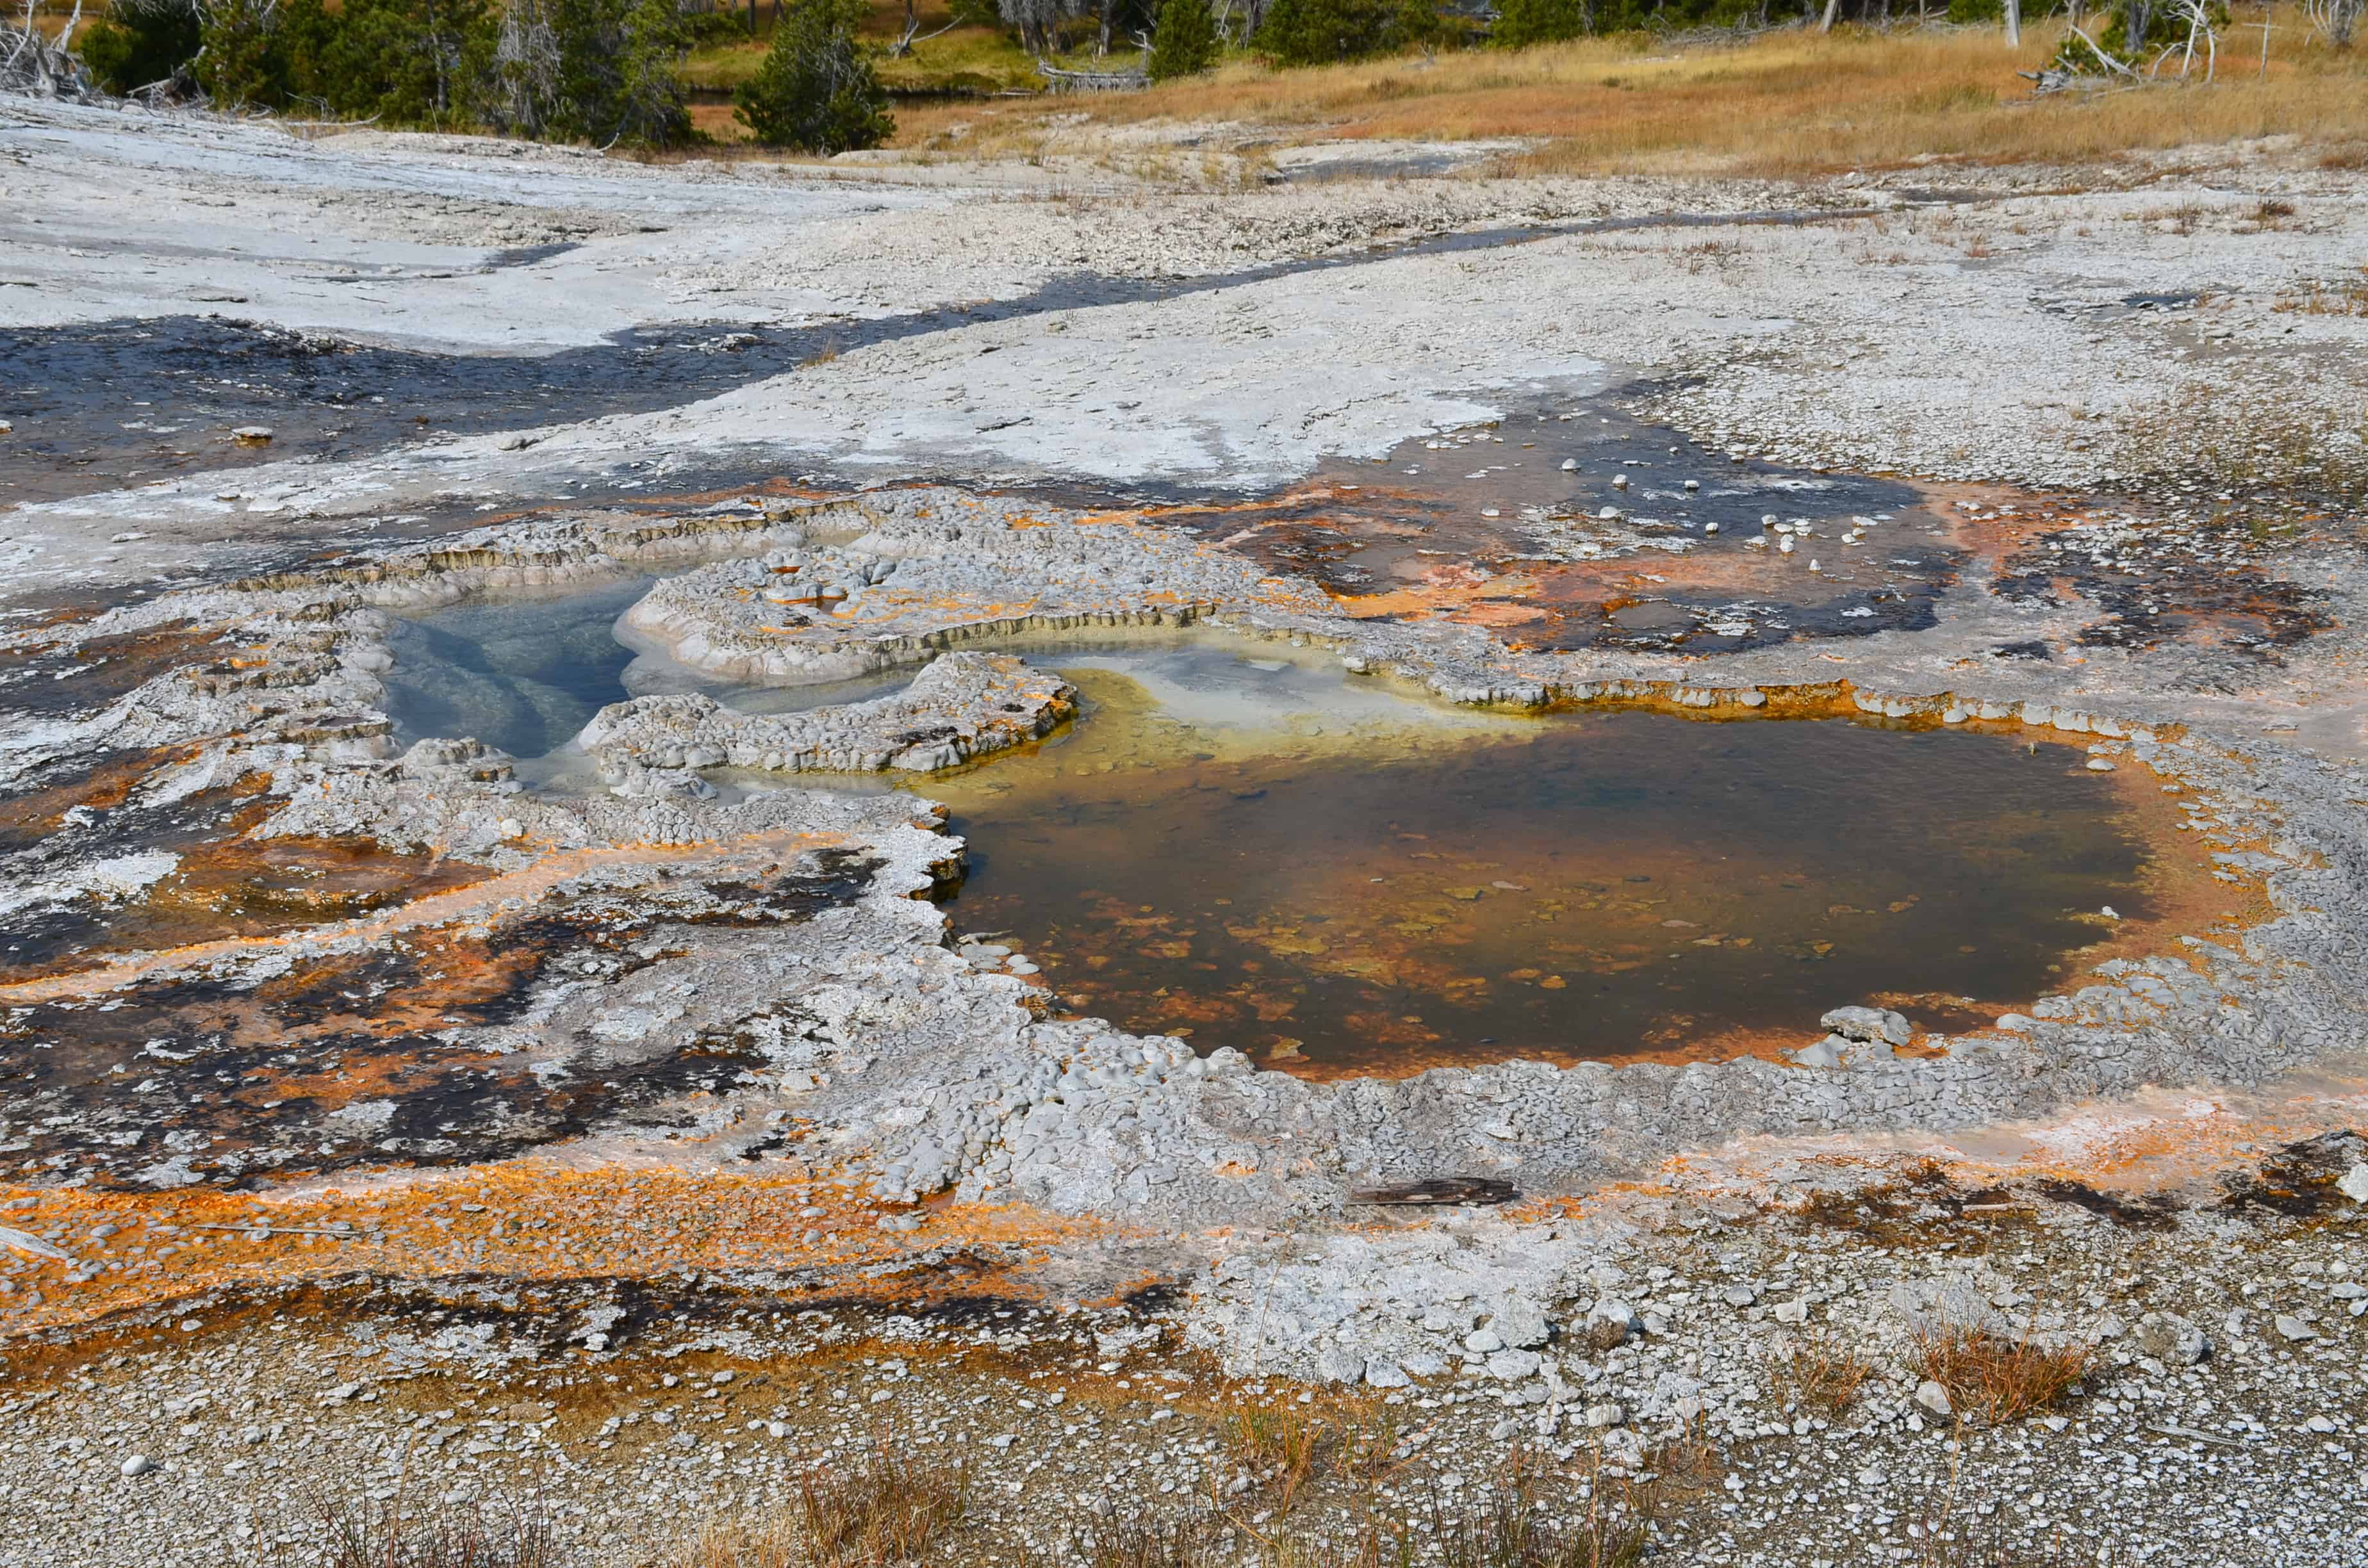 Goggles Spring on Geyser Hill at the Upper Geyser Basin in Yellowstone National Park, Wyoming